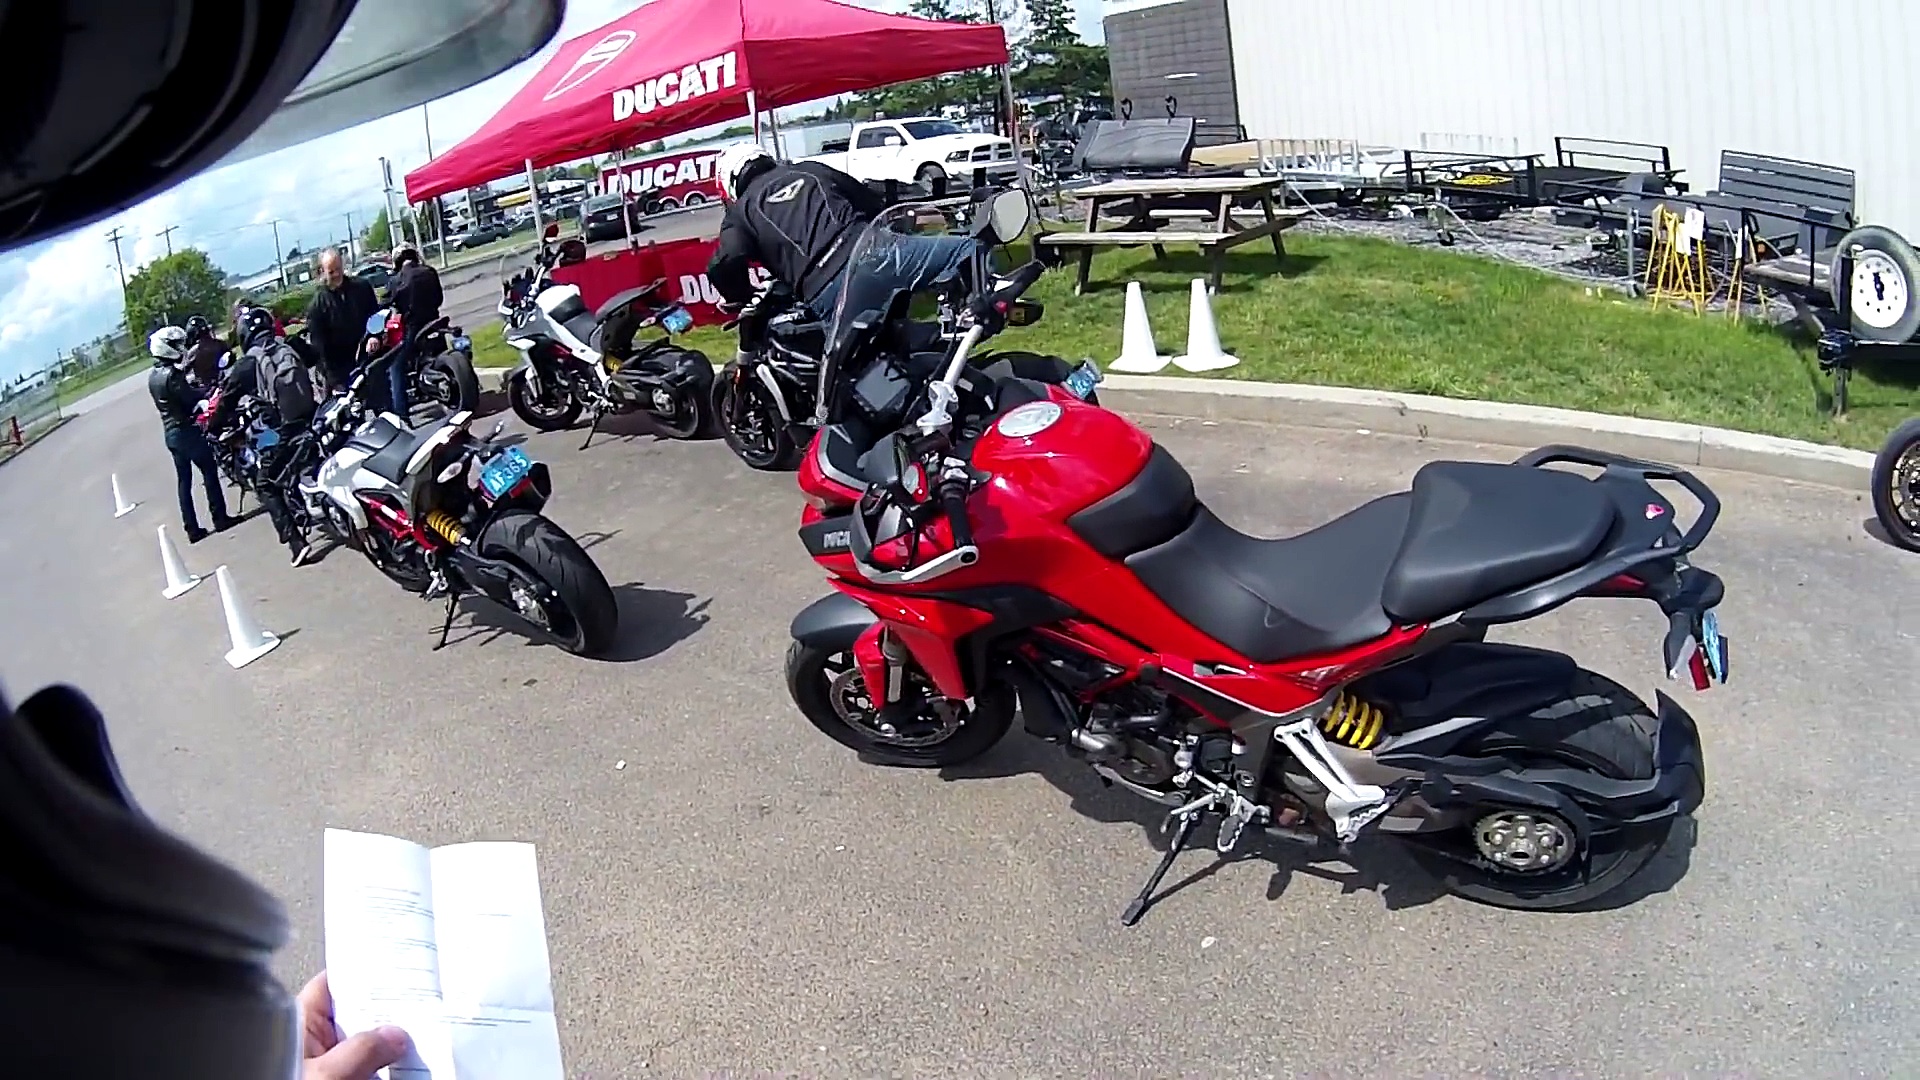 2016 Ducati Multistrada Review from Argyll Motorsports Ducati Demo Days